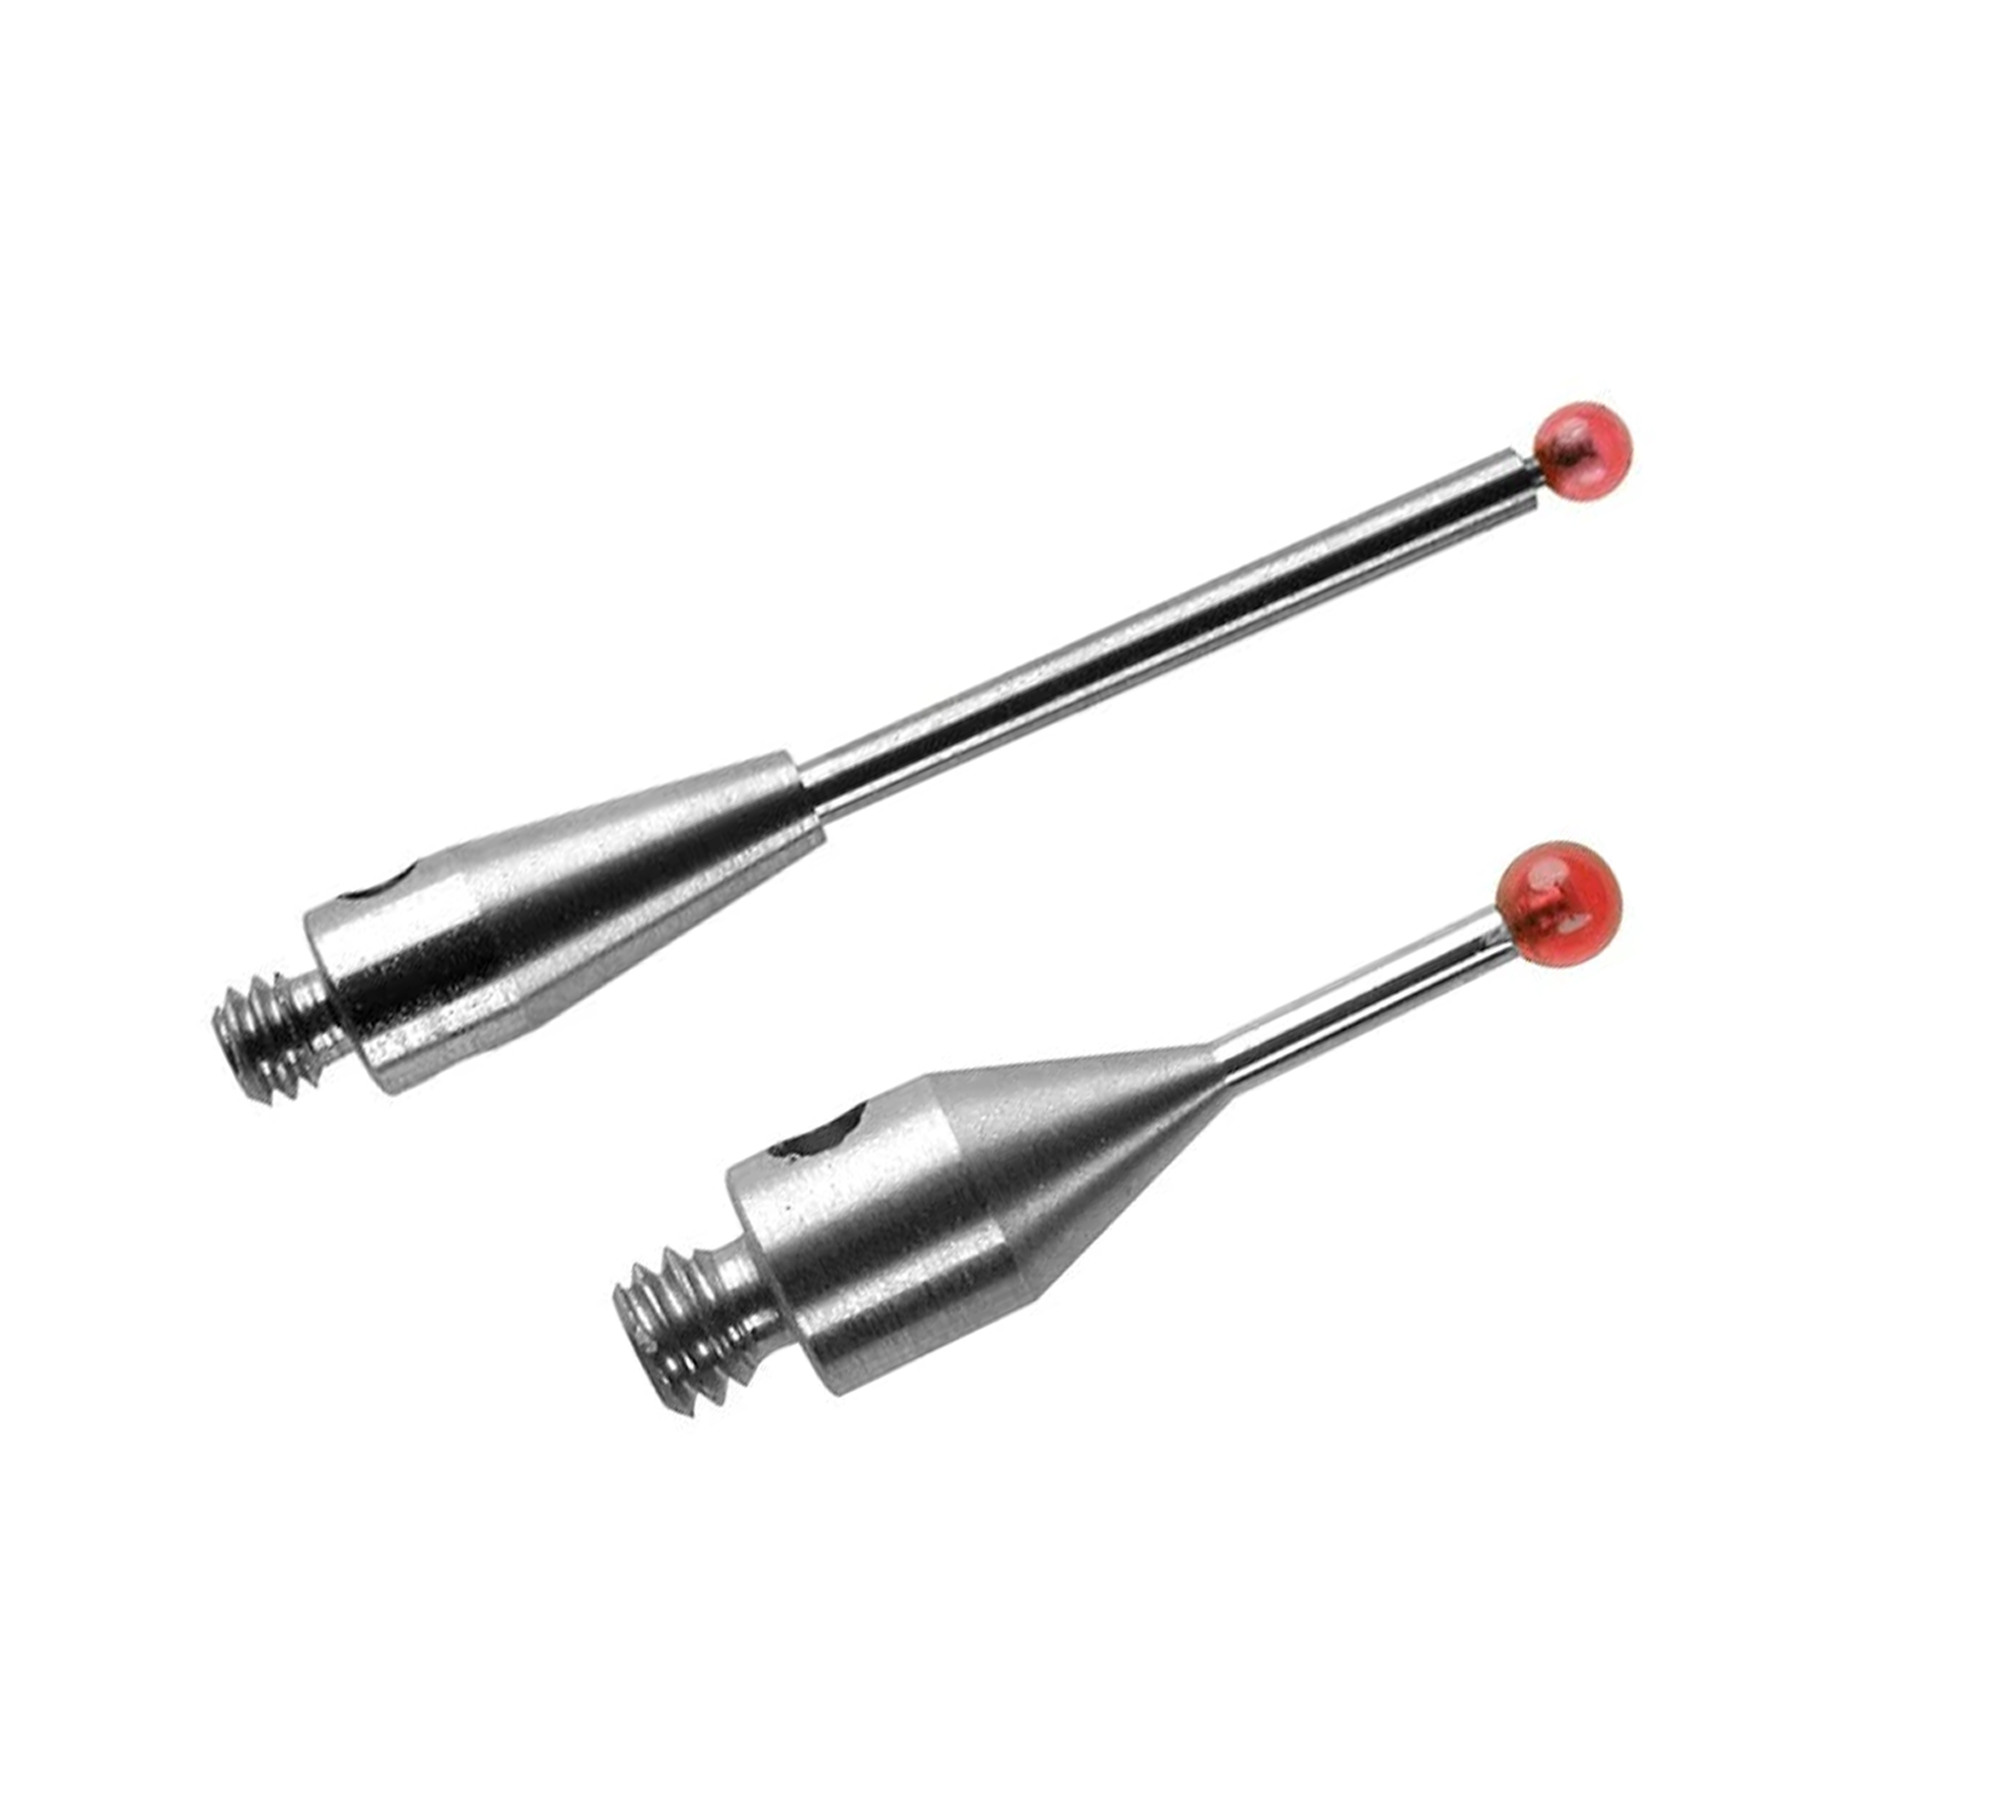 Shop CMM Stylus M2 Threads at GreatGages.com